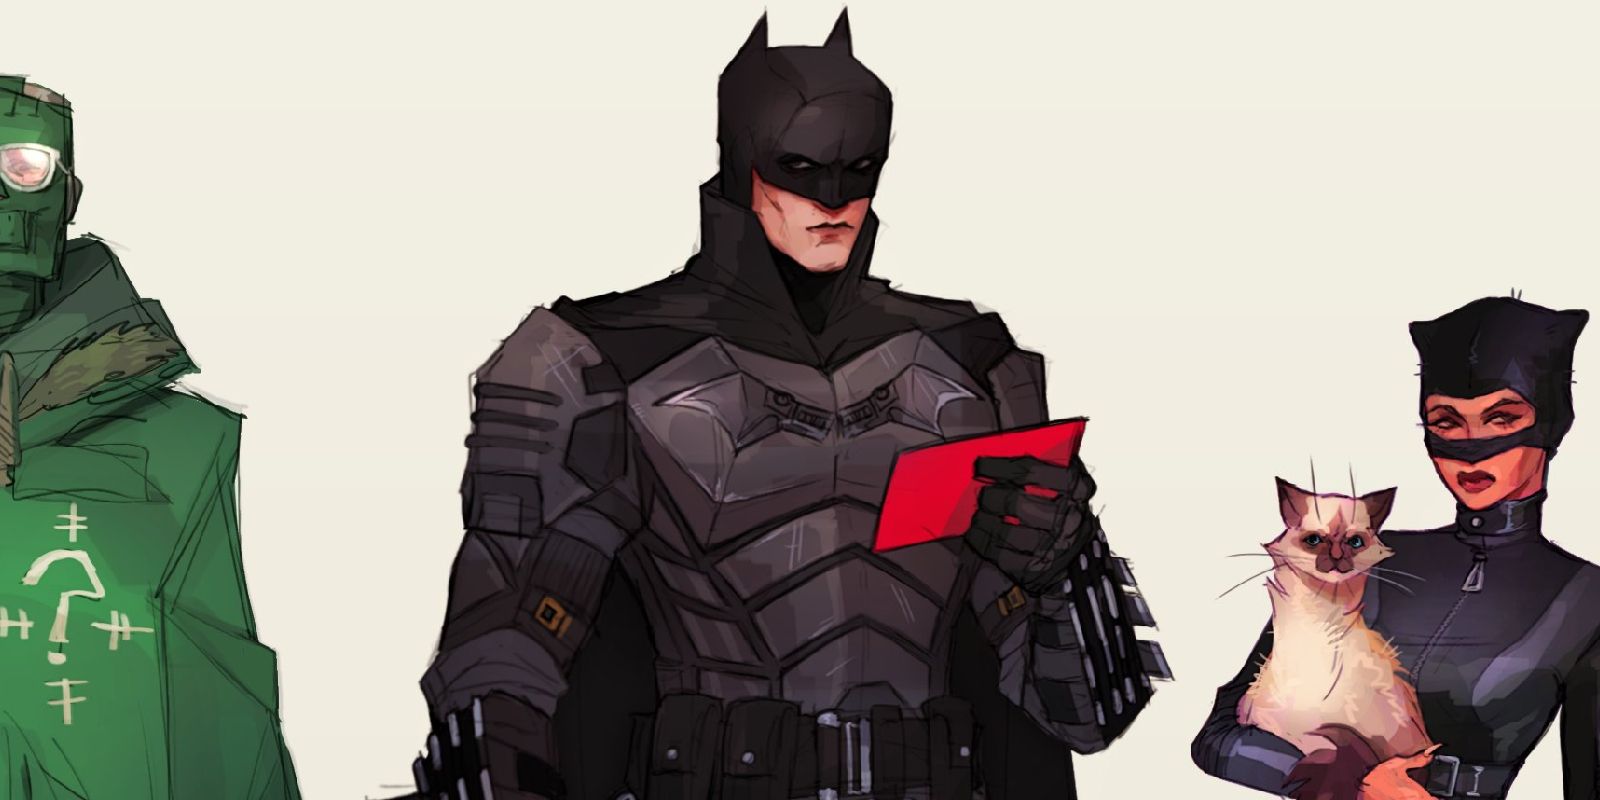 Picture-Perfect The Batman Fan Art Has Us Wishing for a Comic Book  Adaptation